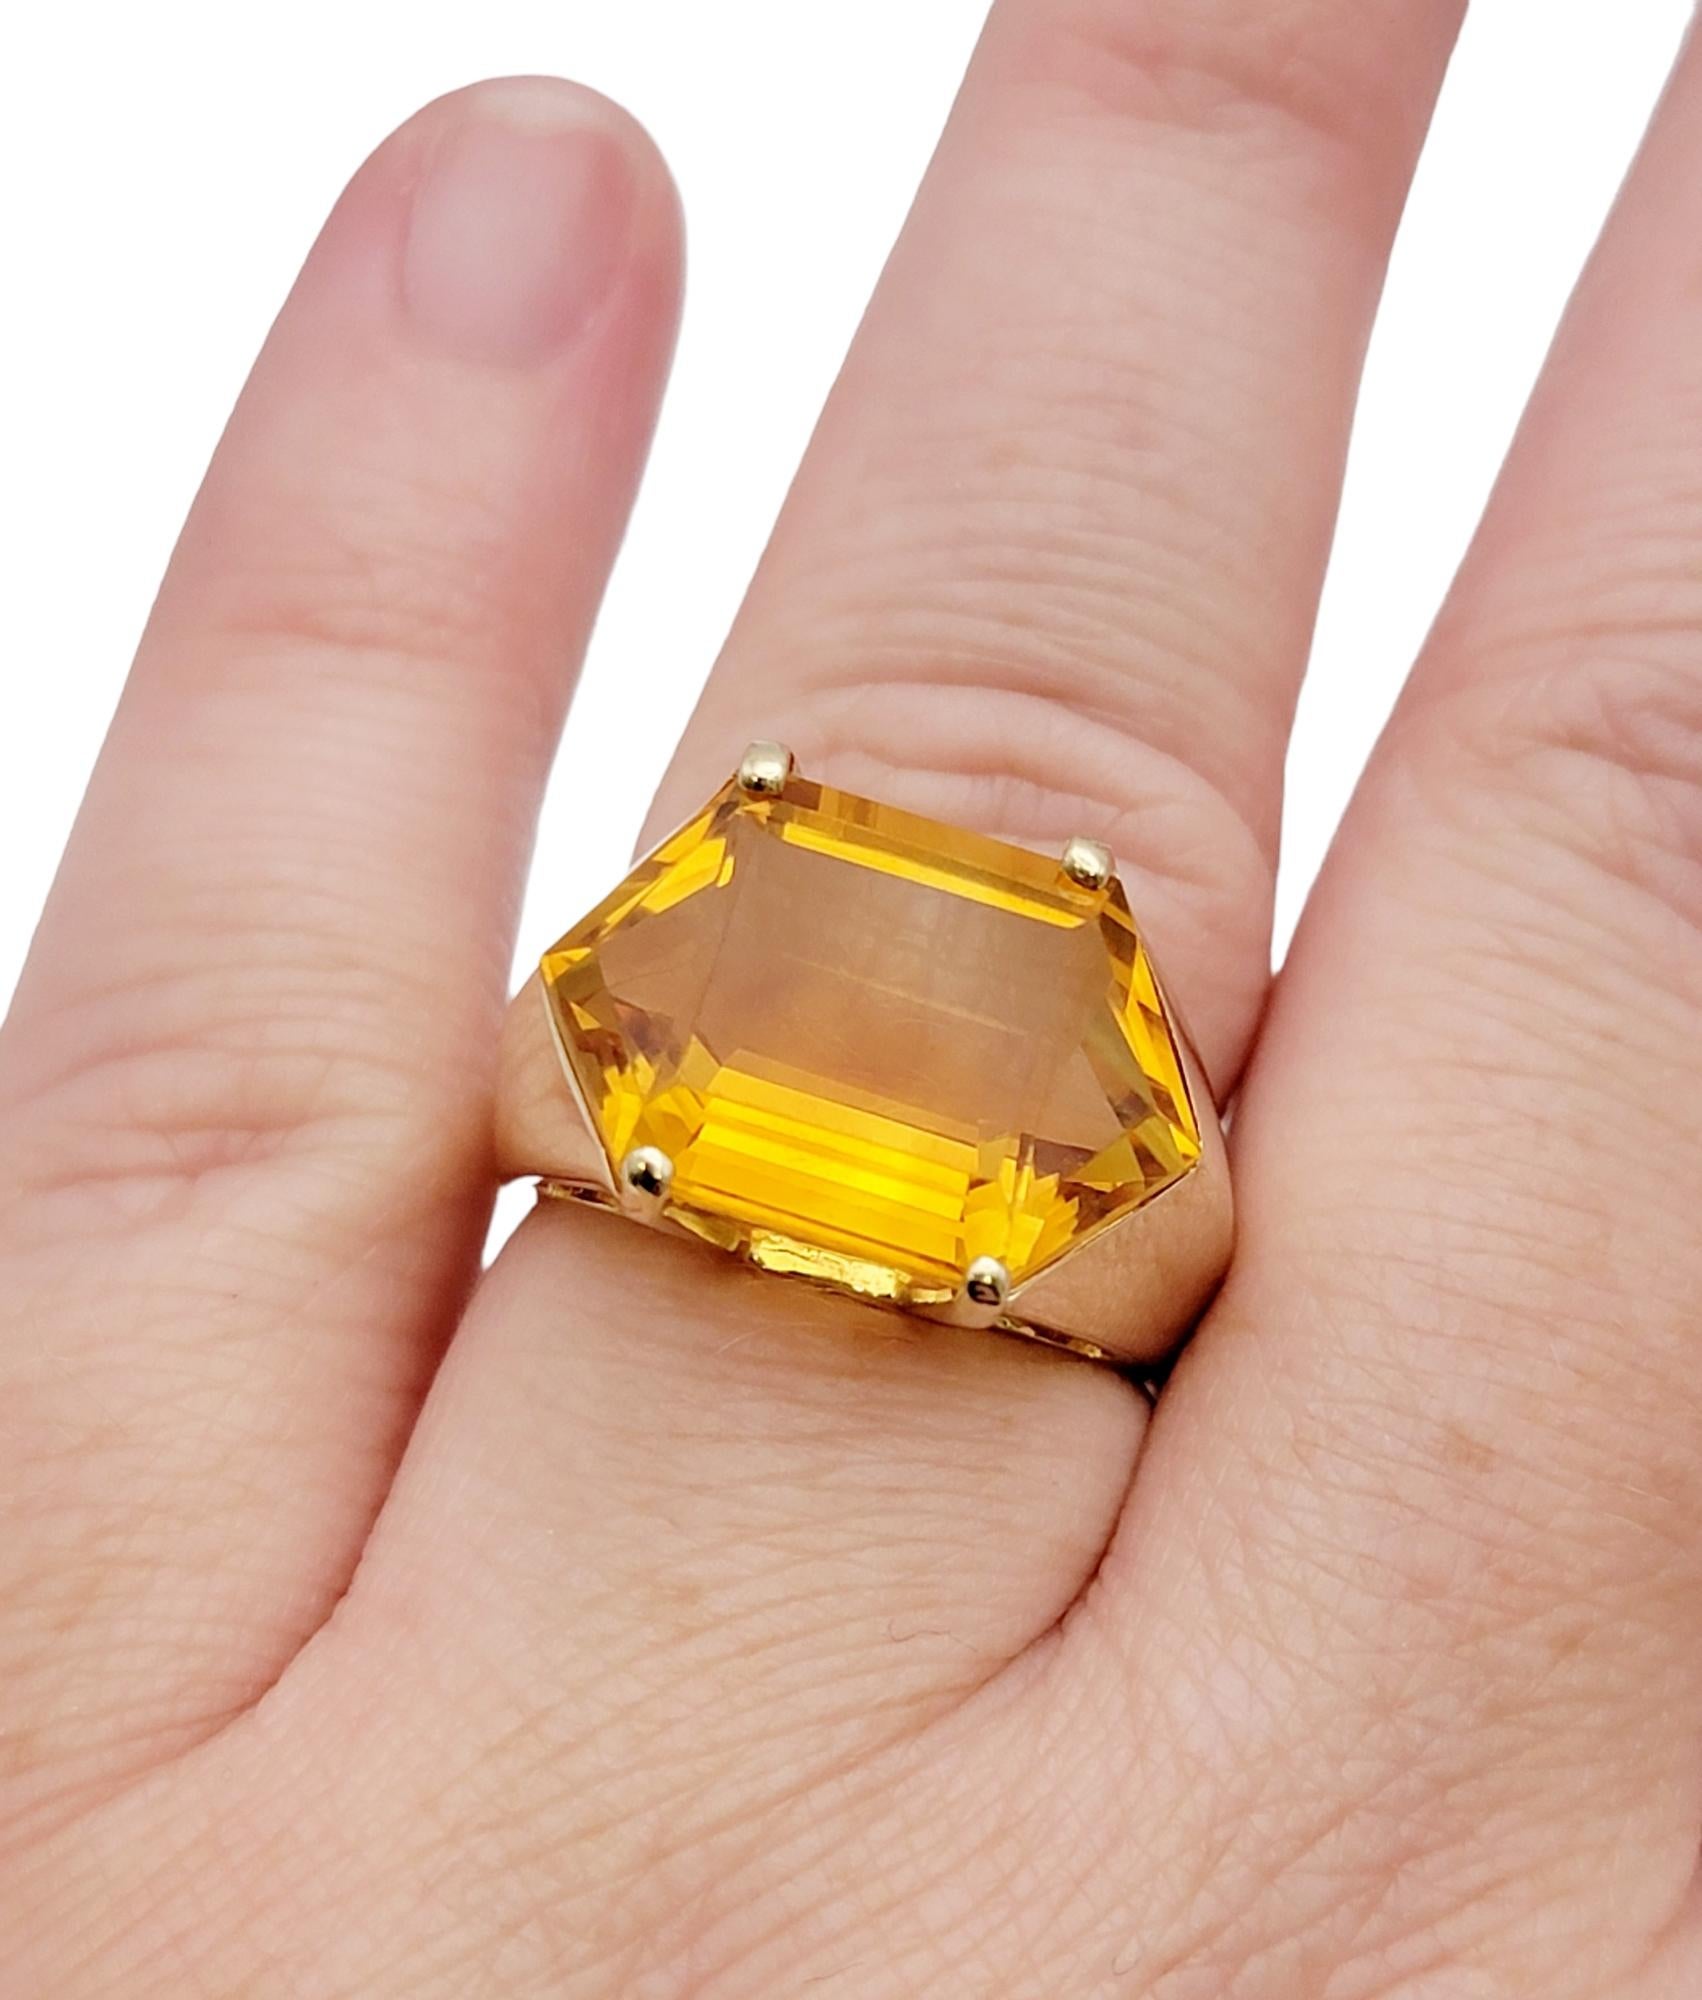 10.46 Carats Total Hexagonal Cut Citrine Cocktail Ring in 14 Karat Yellow Gold For Sale 10